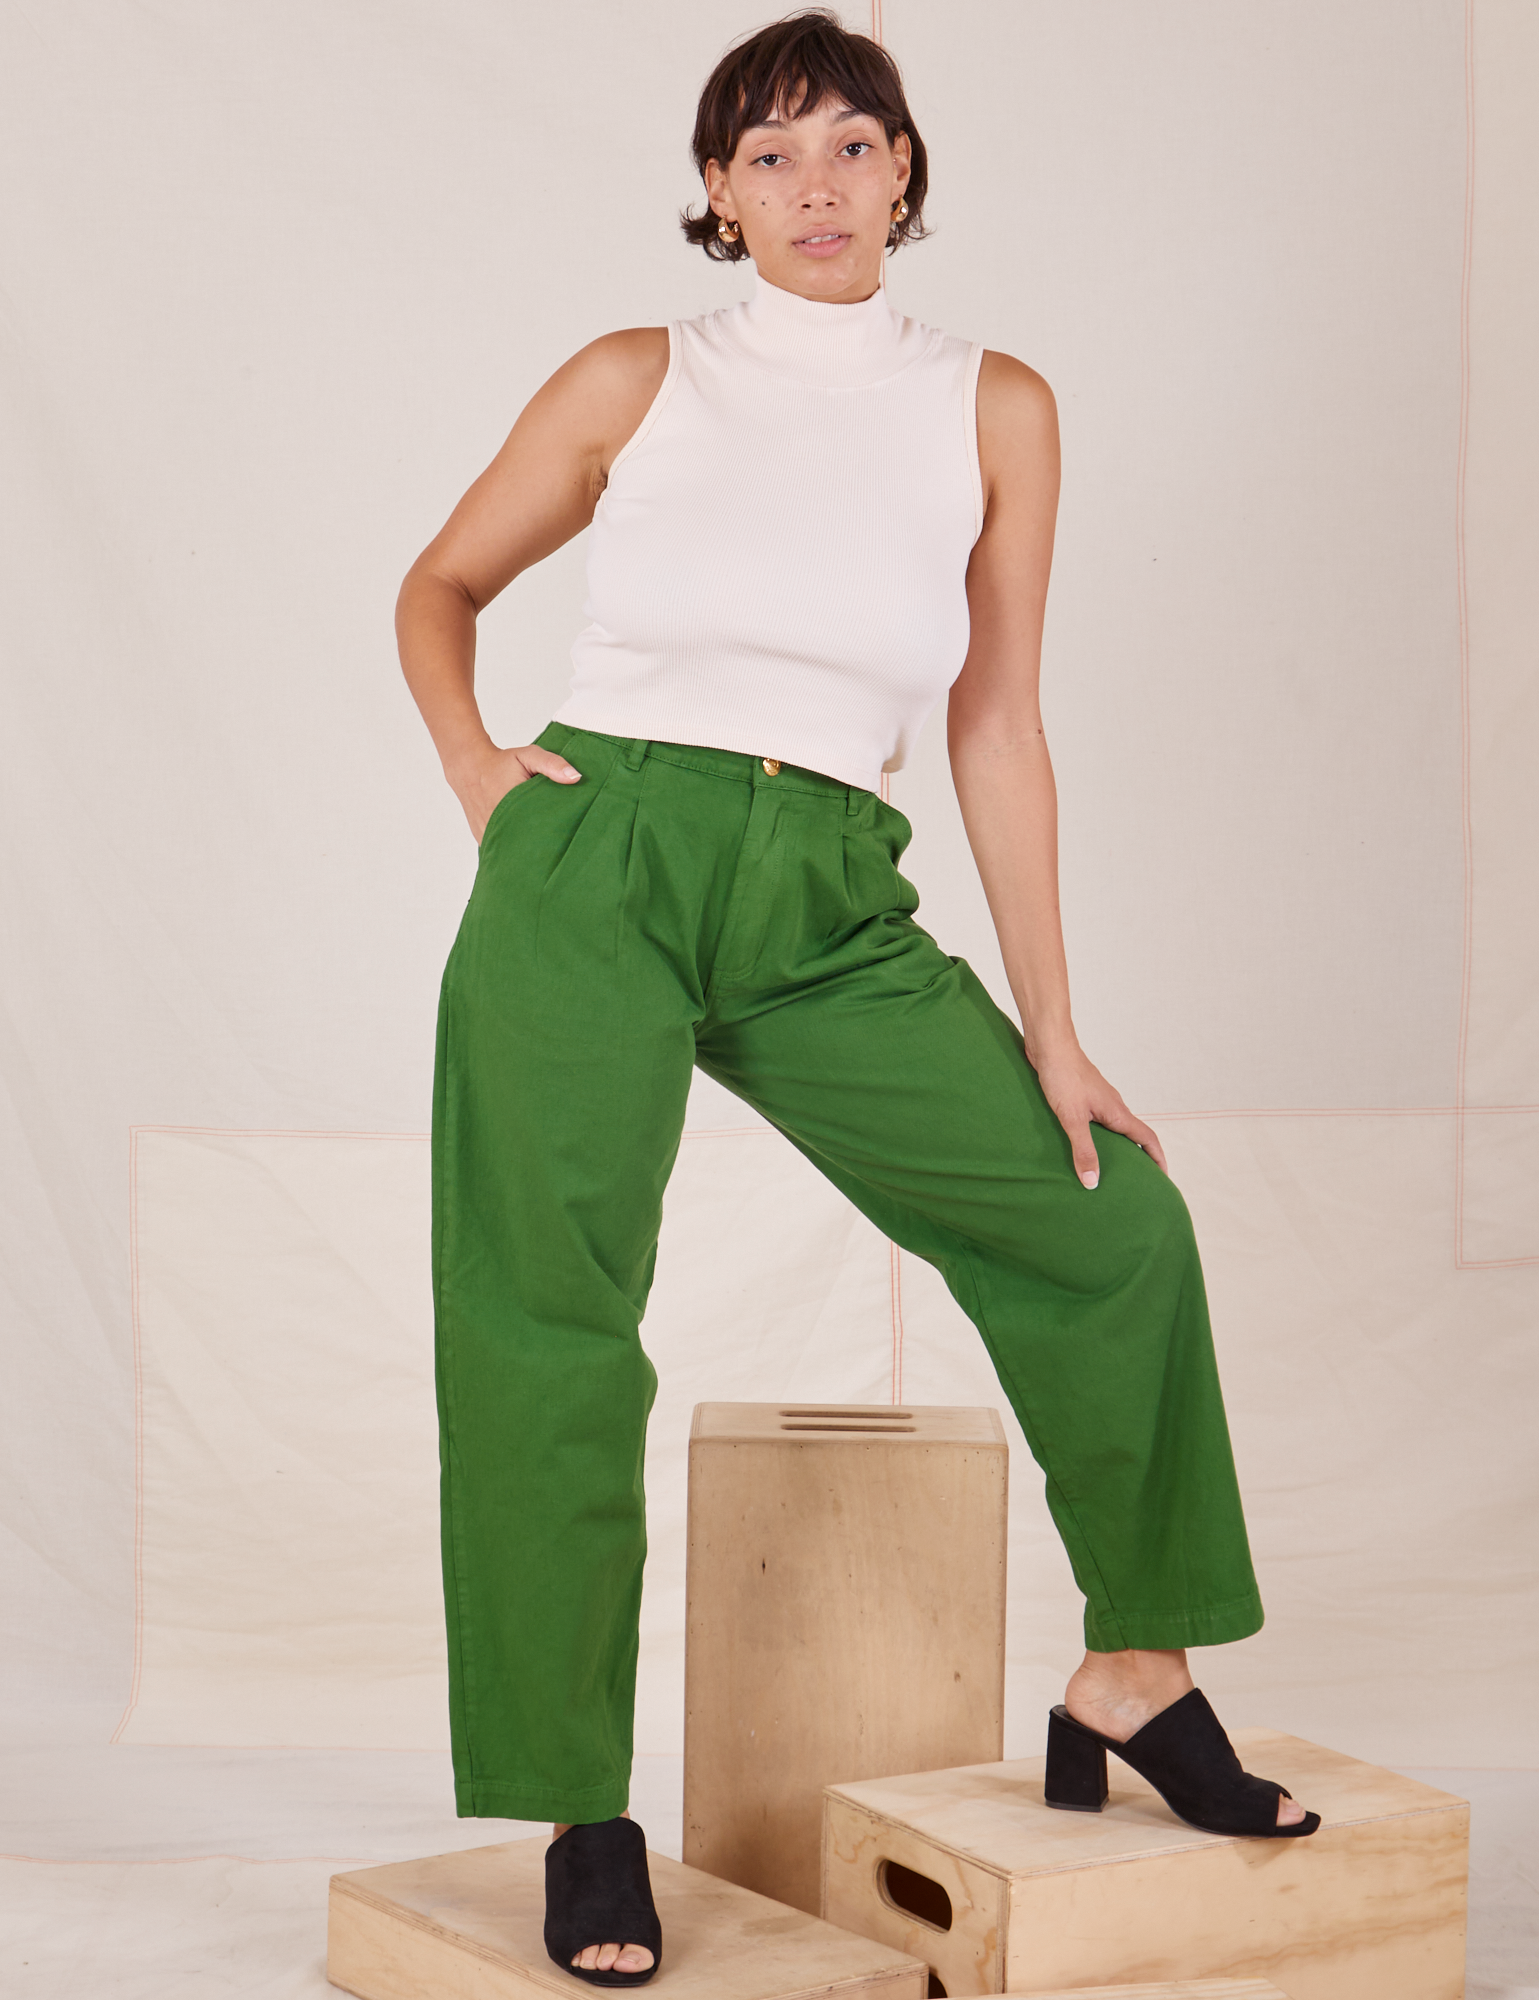 Tiara is 5&#39;4&quot; and wearing S Heavyweight Trousers in Lawn Green paired with Sleeveless Turtleneck in vintage tee off-white